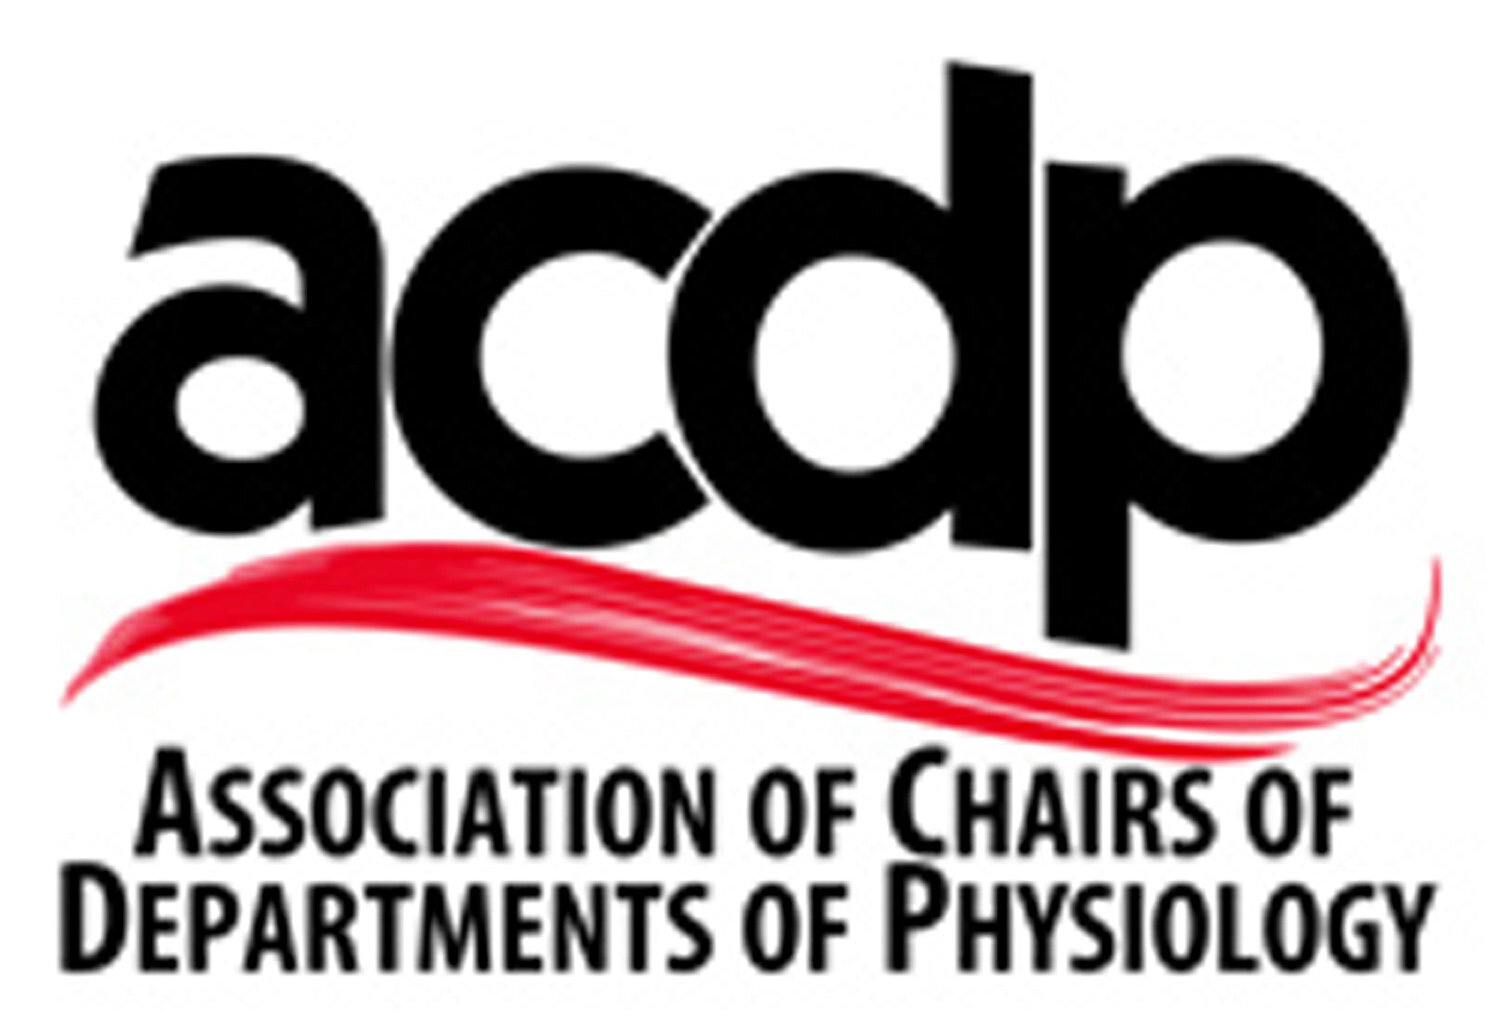 Association of Chairs of Departments of Physiology